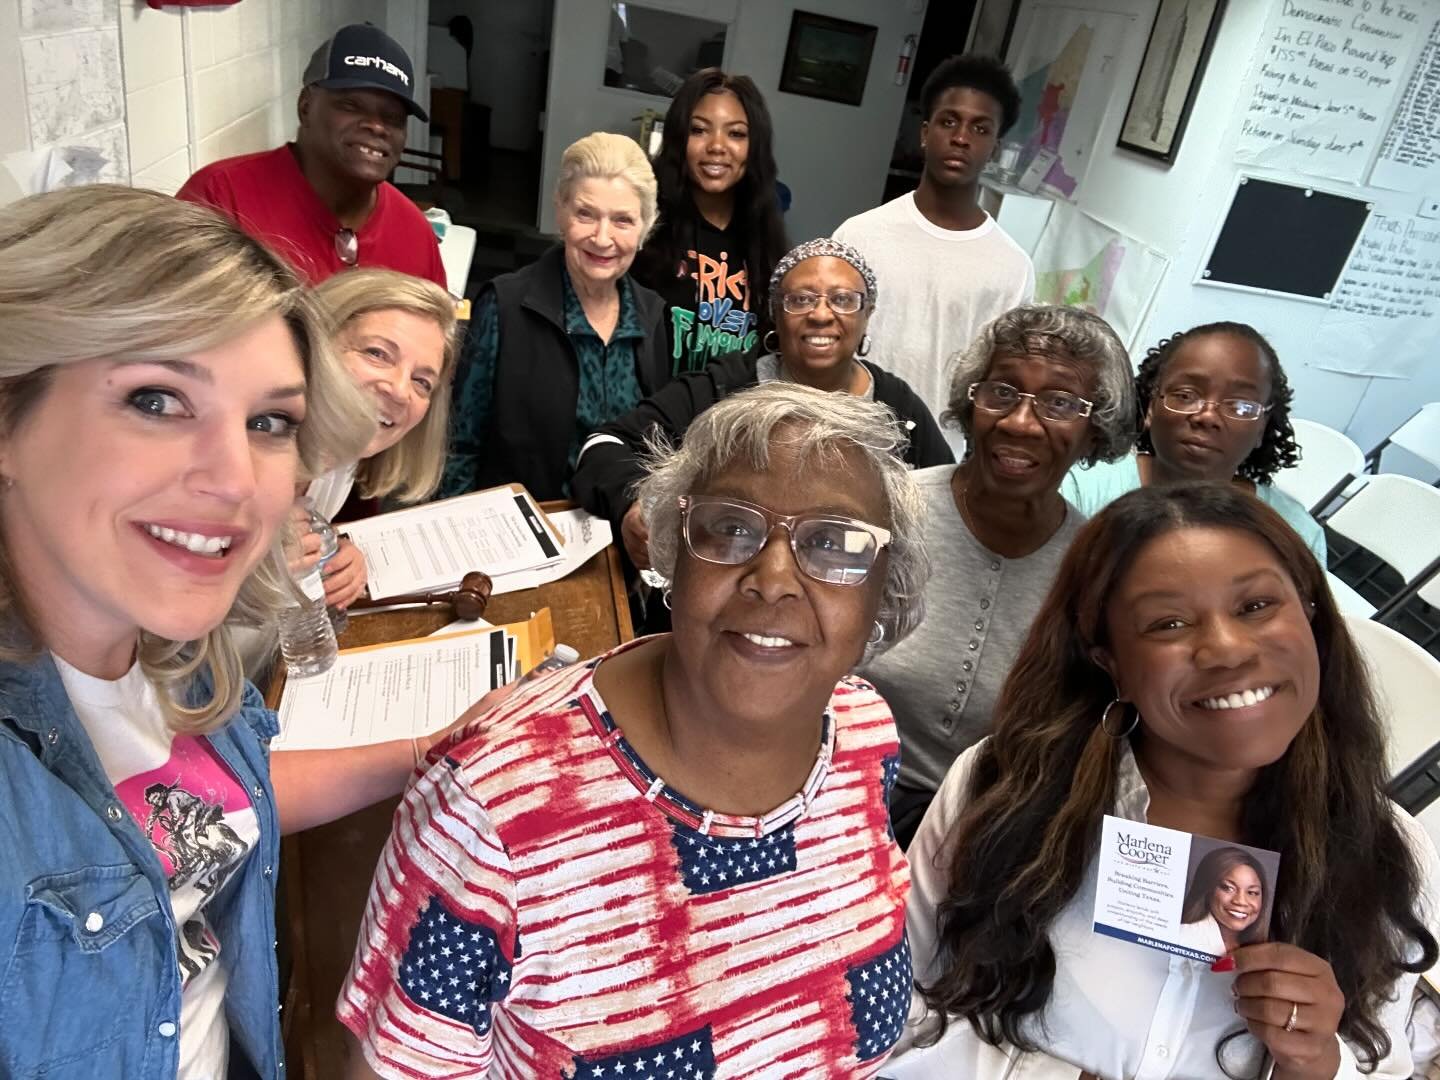 Hey Y&rsquo;all! Whew! This weekend was rewarding to say the least, spending time with various members of the community. First stop, volunteering at New Gate Mission, a local homeless shelter, and providing meals and support to those in need. A local